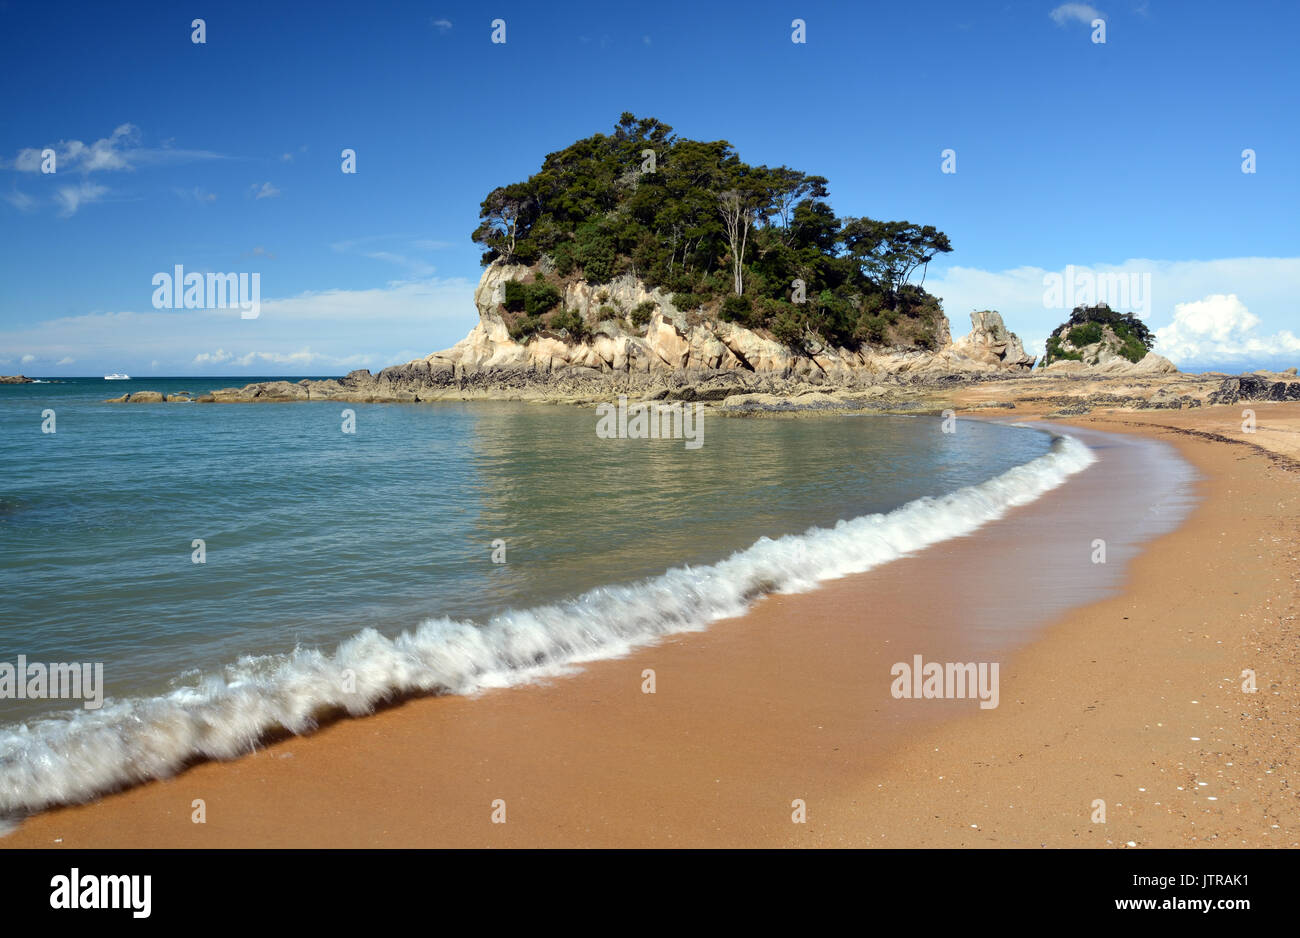 The golden sands & crystal clear water at Kaiteriteri beach, New Zealand with copy space. Stock Photo